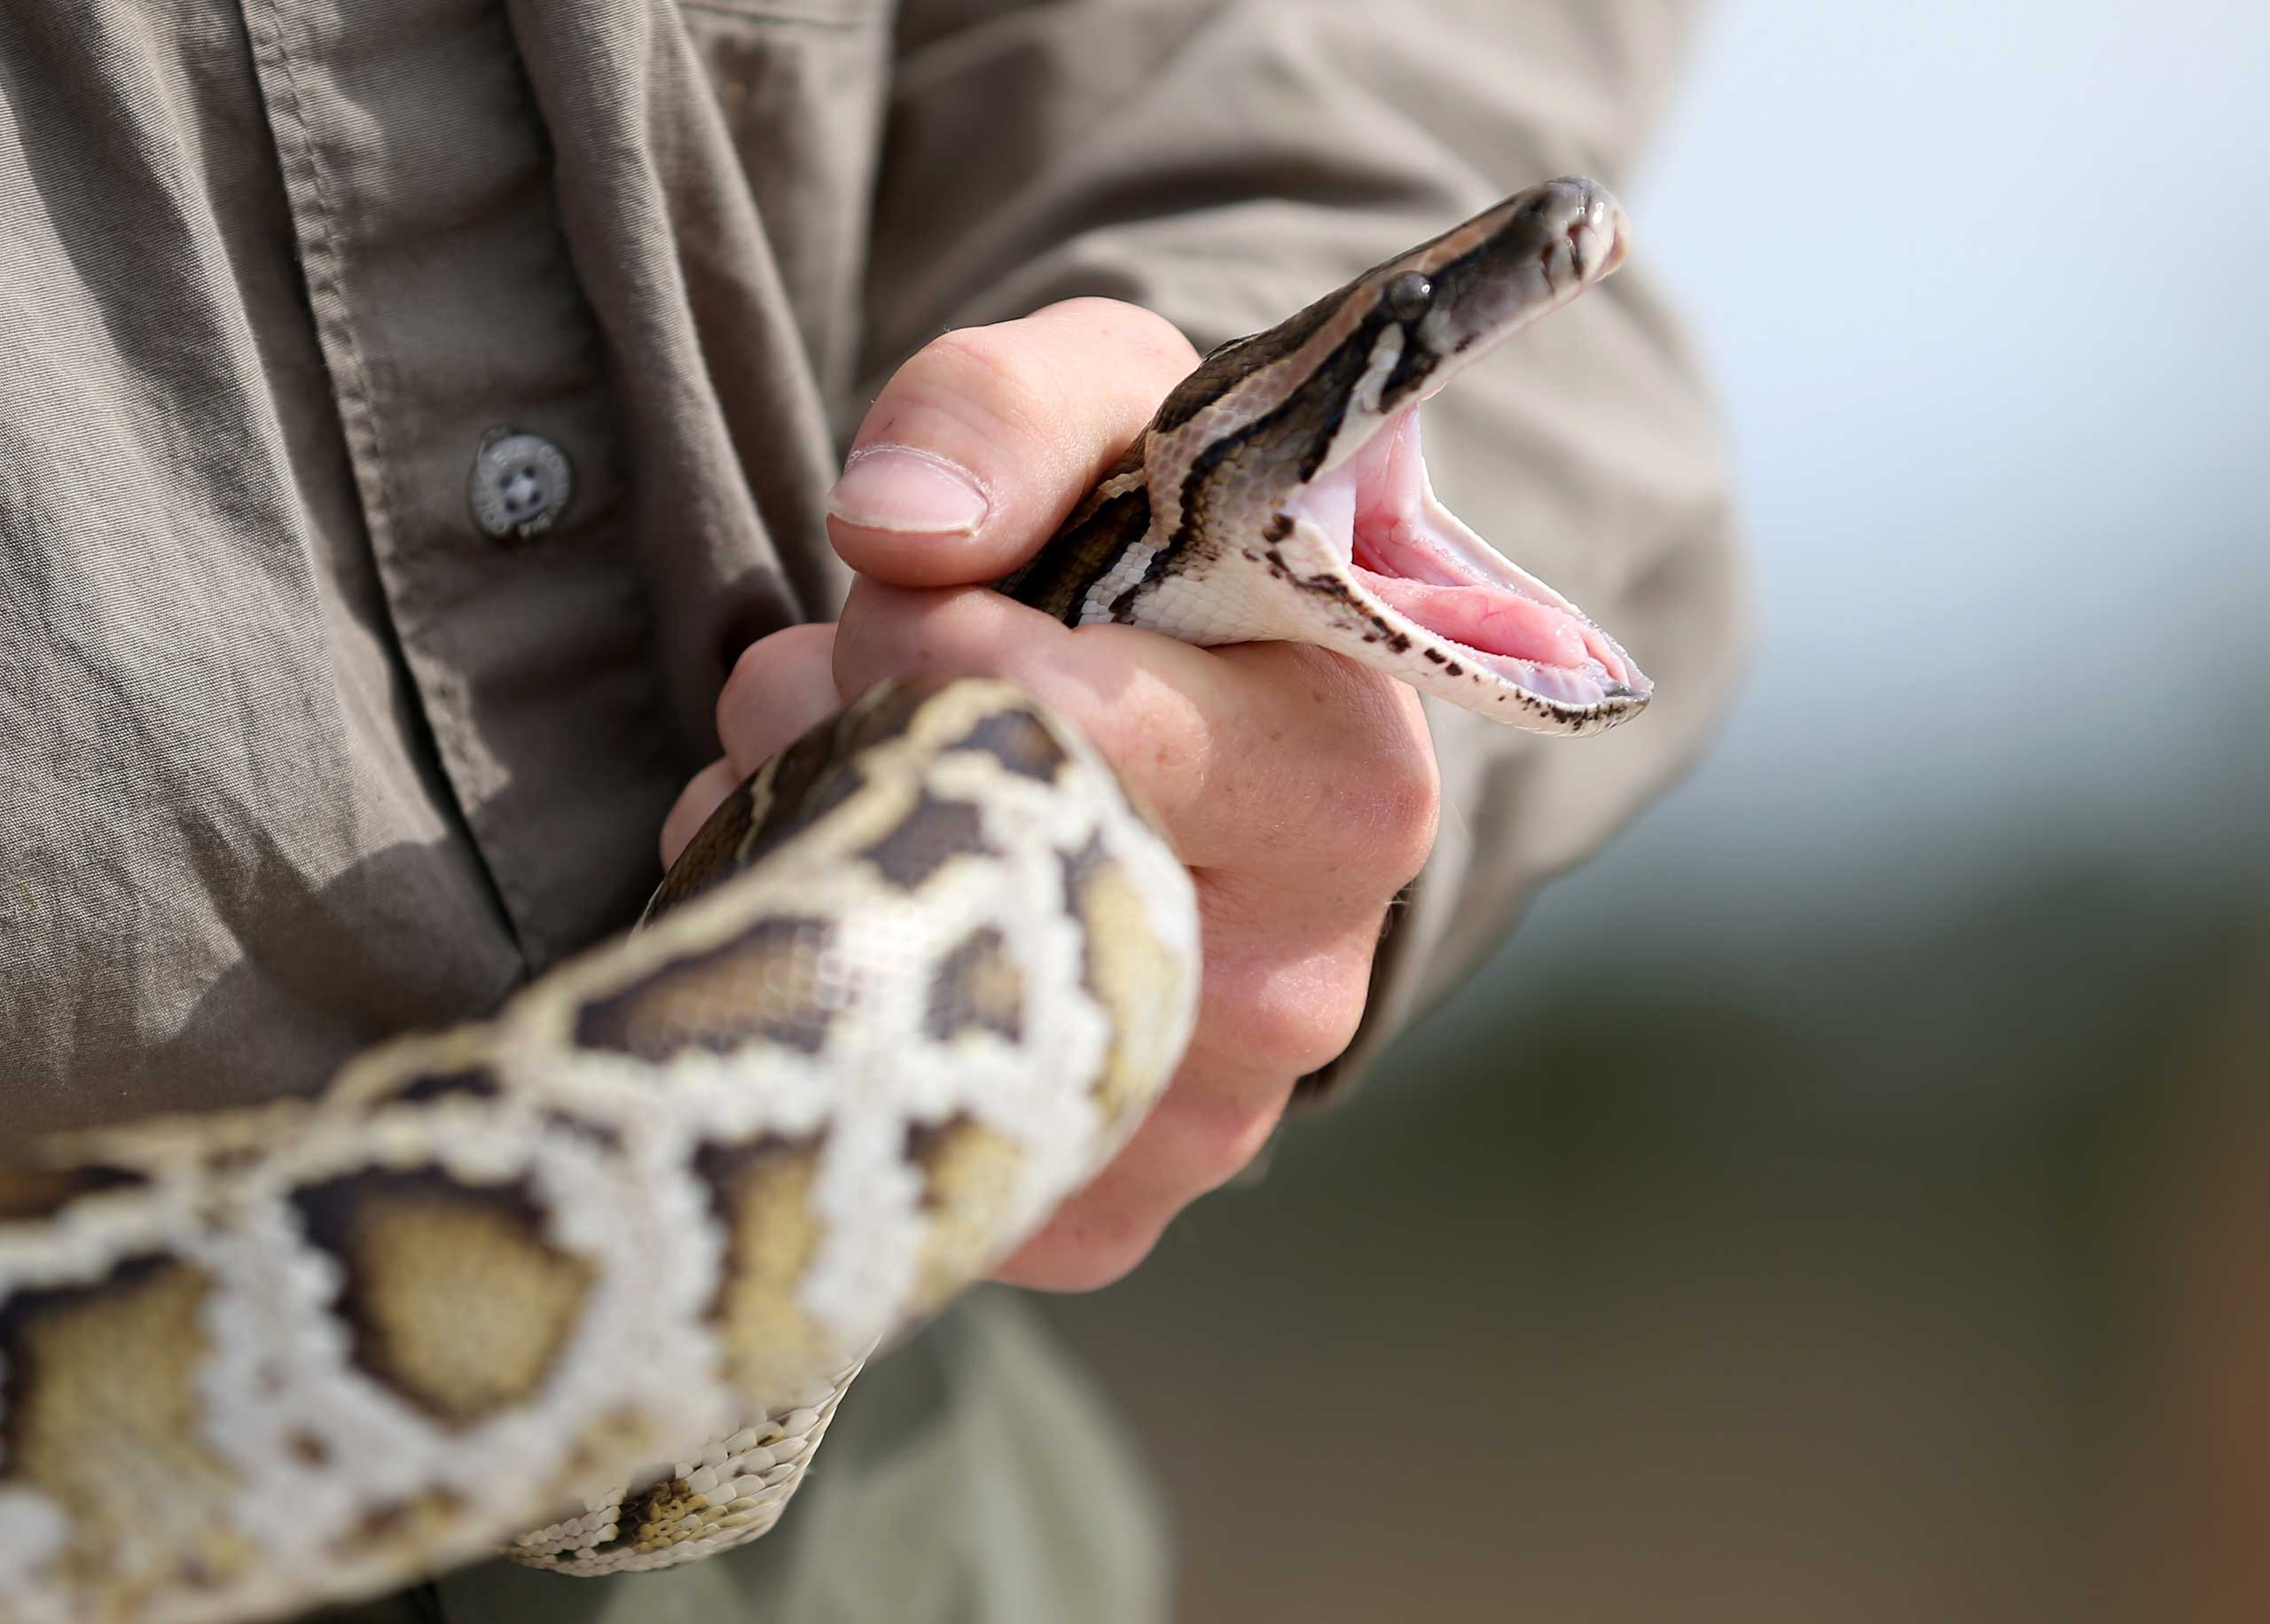 Edward Mercer, a  Florida Fish and Wildlife Conservation Commission non-native Wildlife Technician, holds a Burmese Python during a press conference in the Florida Everglades about the non-native species on January 29, 2015 in Miami. (Joe Raedle—Getty Images)